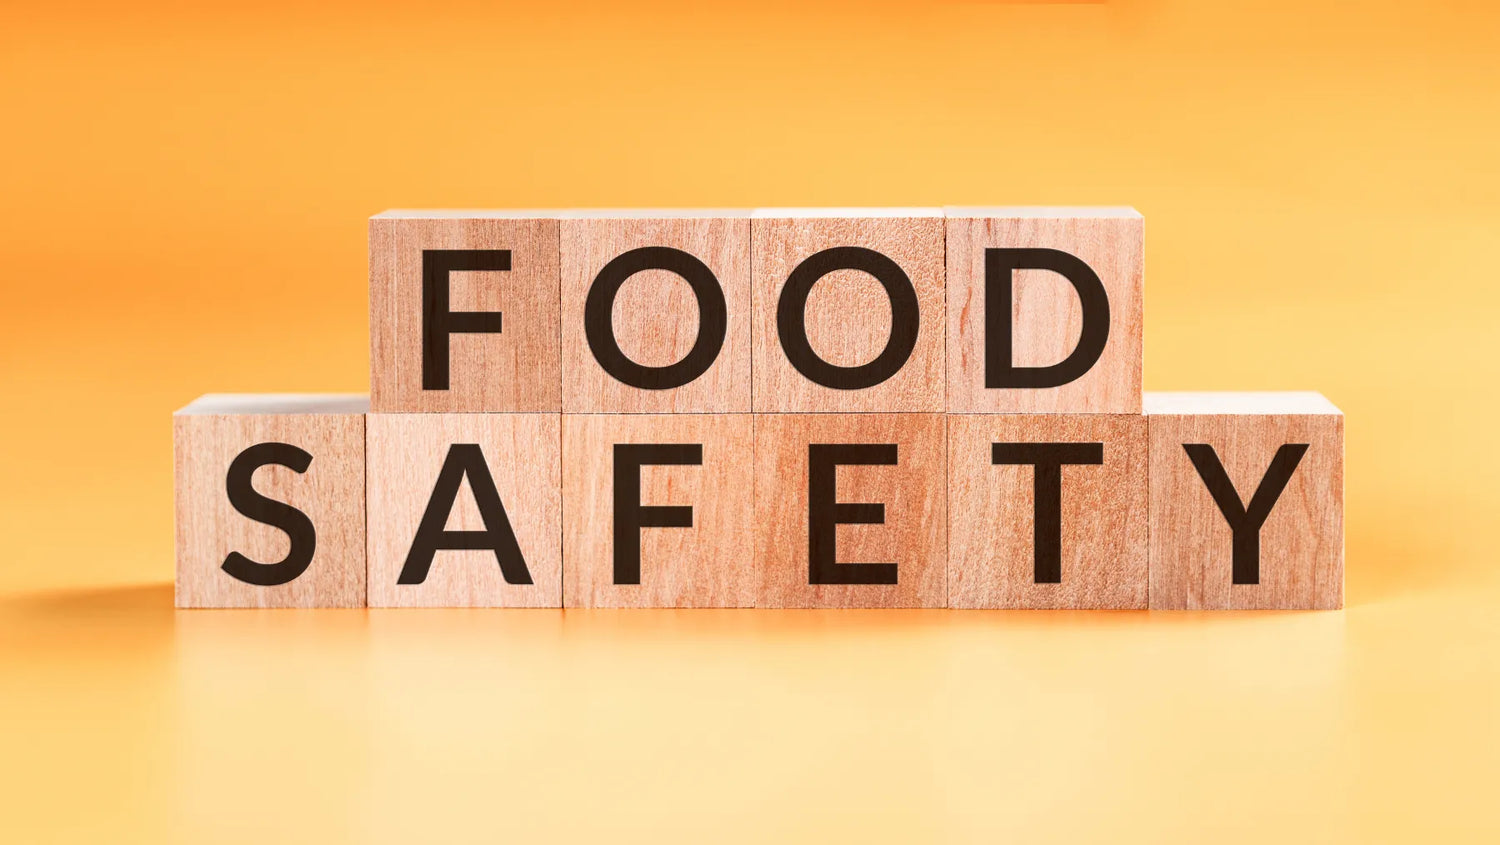 Food Safety - Our Commitment to You